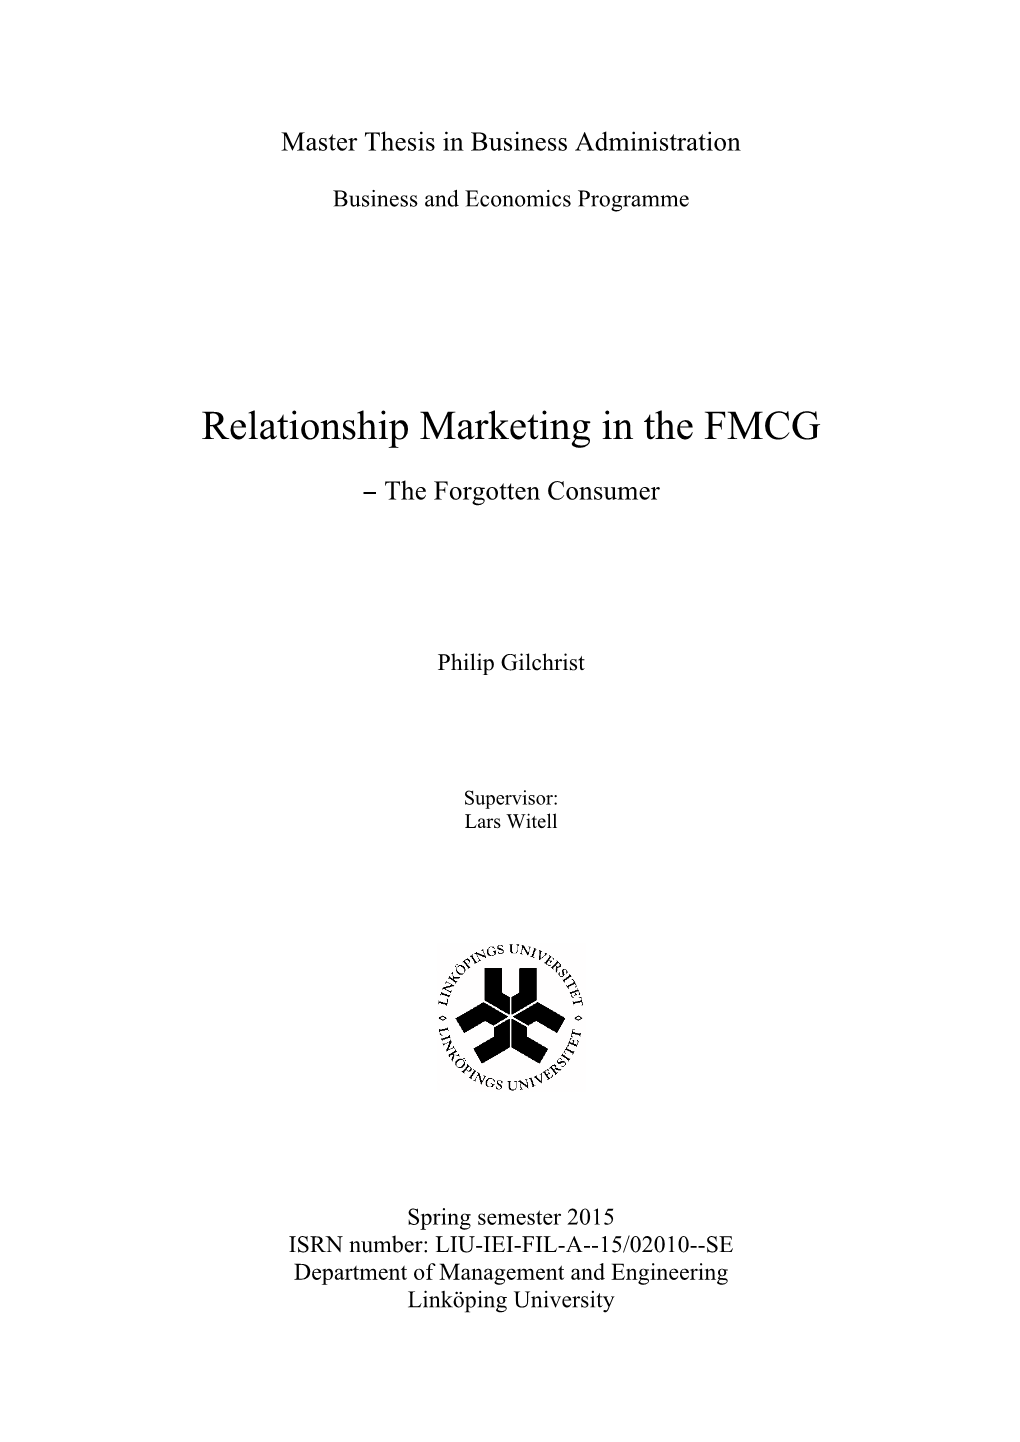 Relationship Marketing in the FMCG